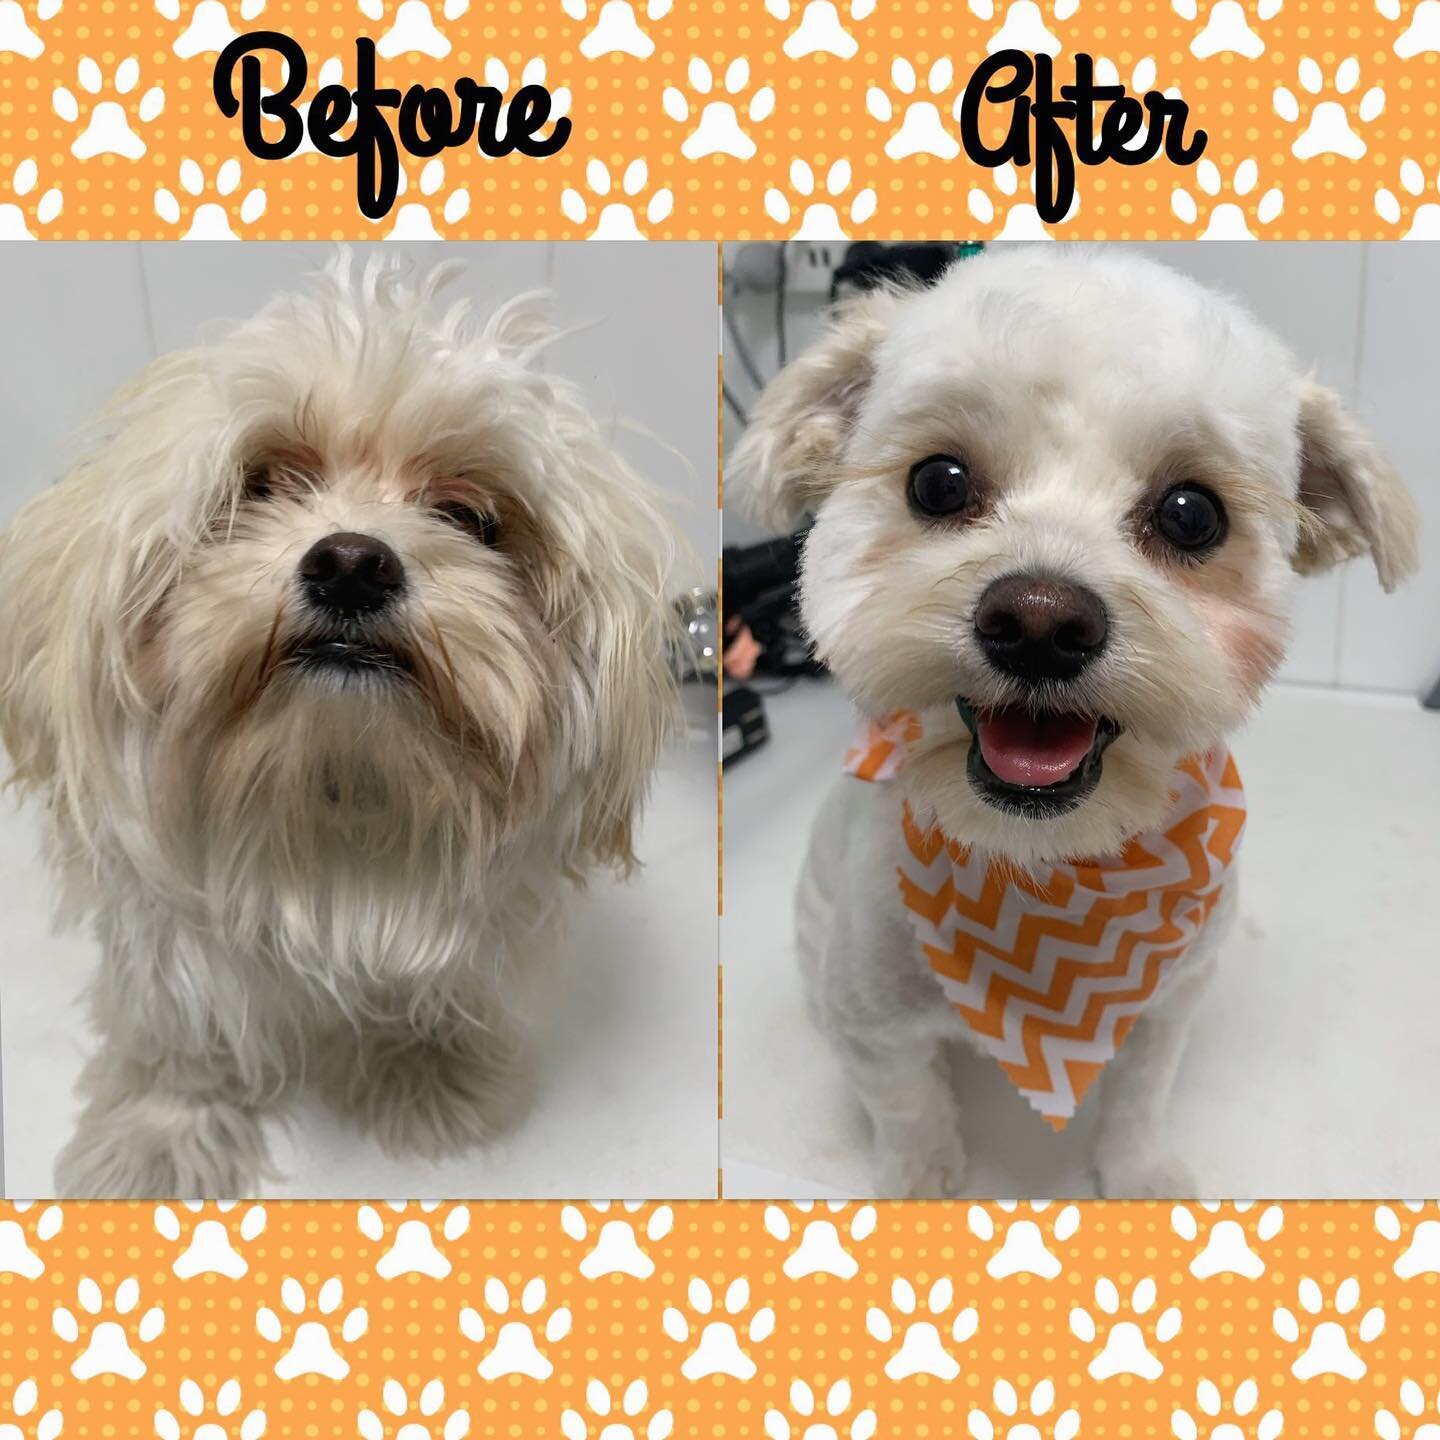 This gorgeous girl came in for her very first groom and felt like a whole new pup once freed from pesky knotting and matting. Remember to start brushing and combing the minute you bring your pup home to get them used to it 🤗